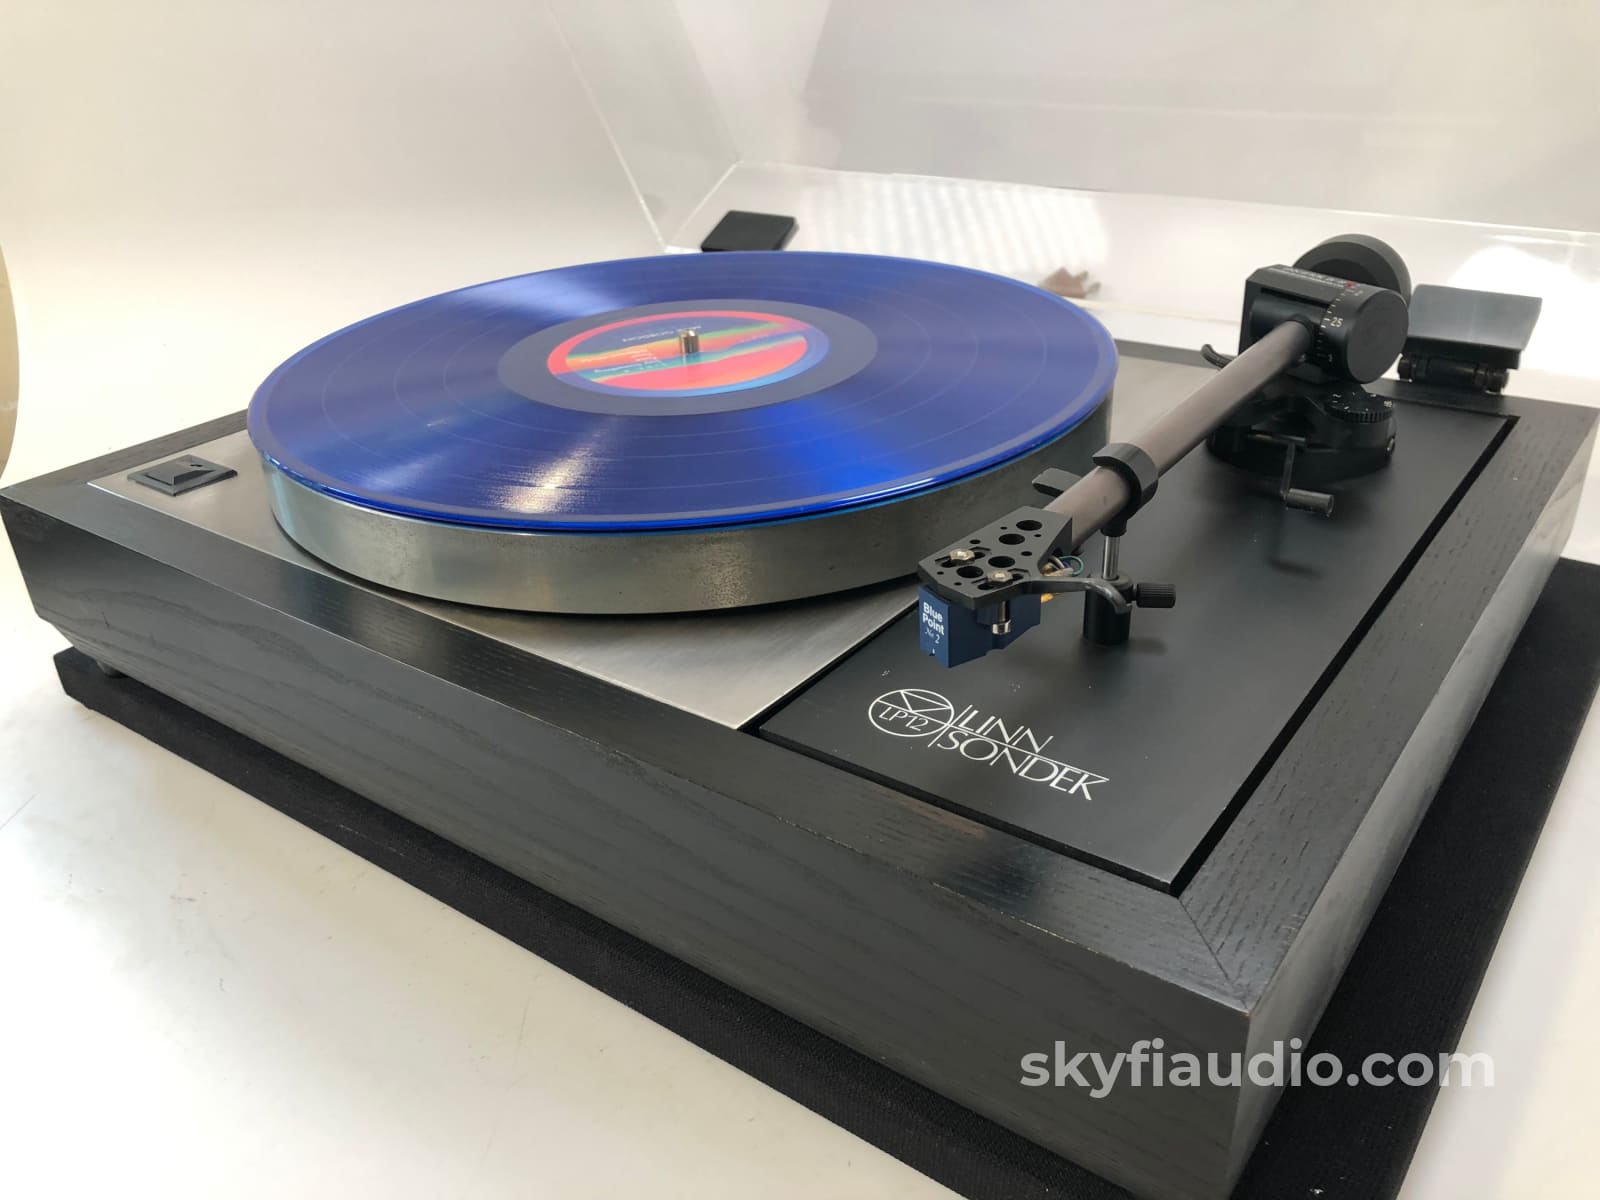 Legendary Linn Lp12 Turntable With New Sumiko Blue Point No. 2 Cartridge